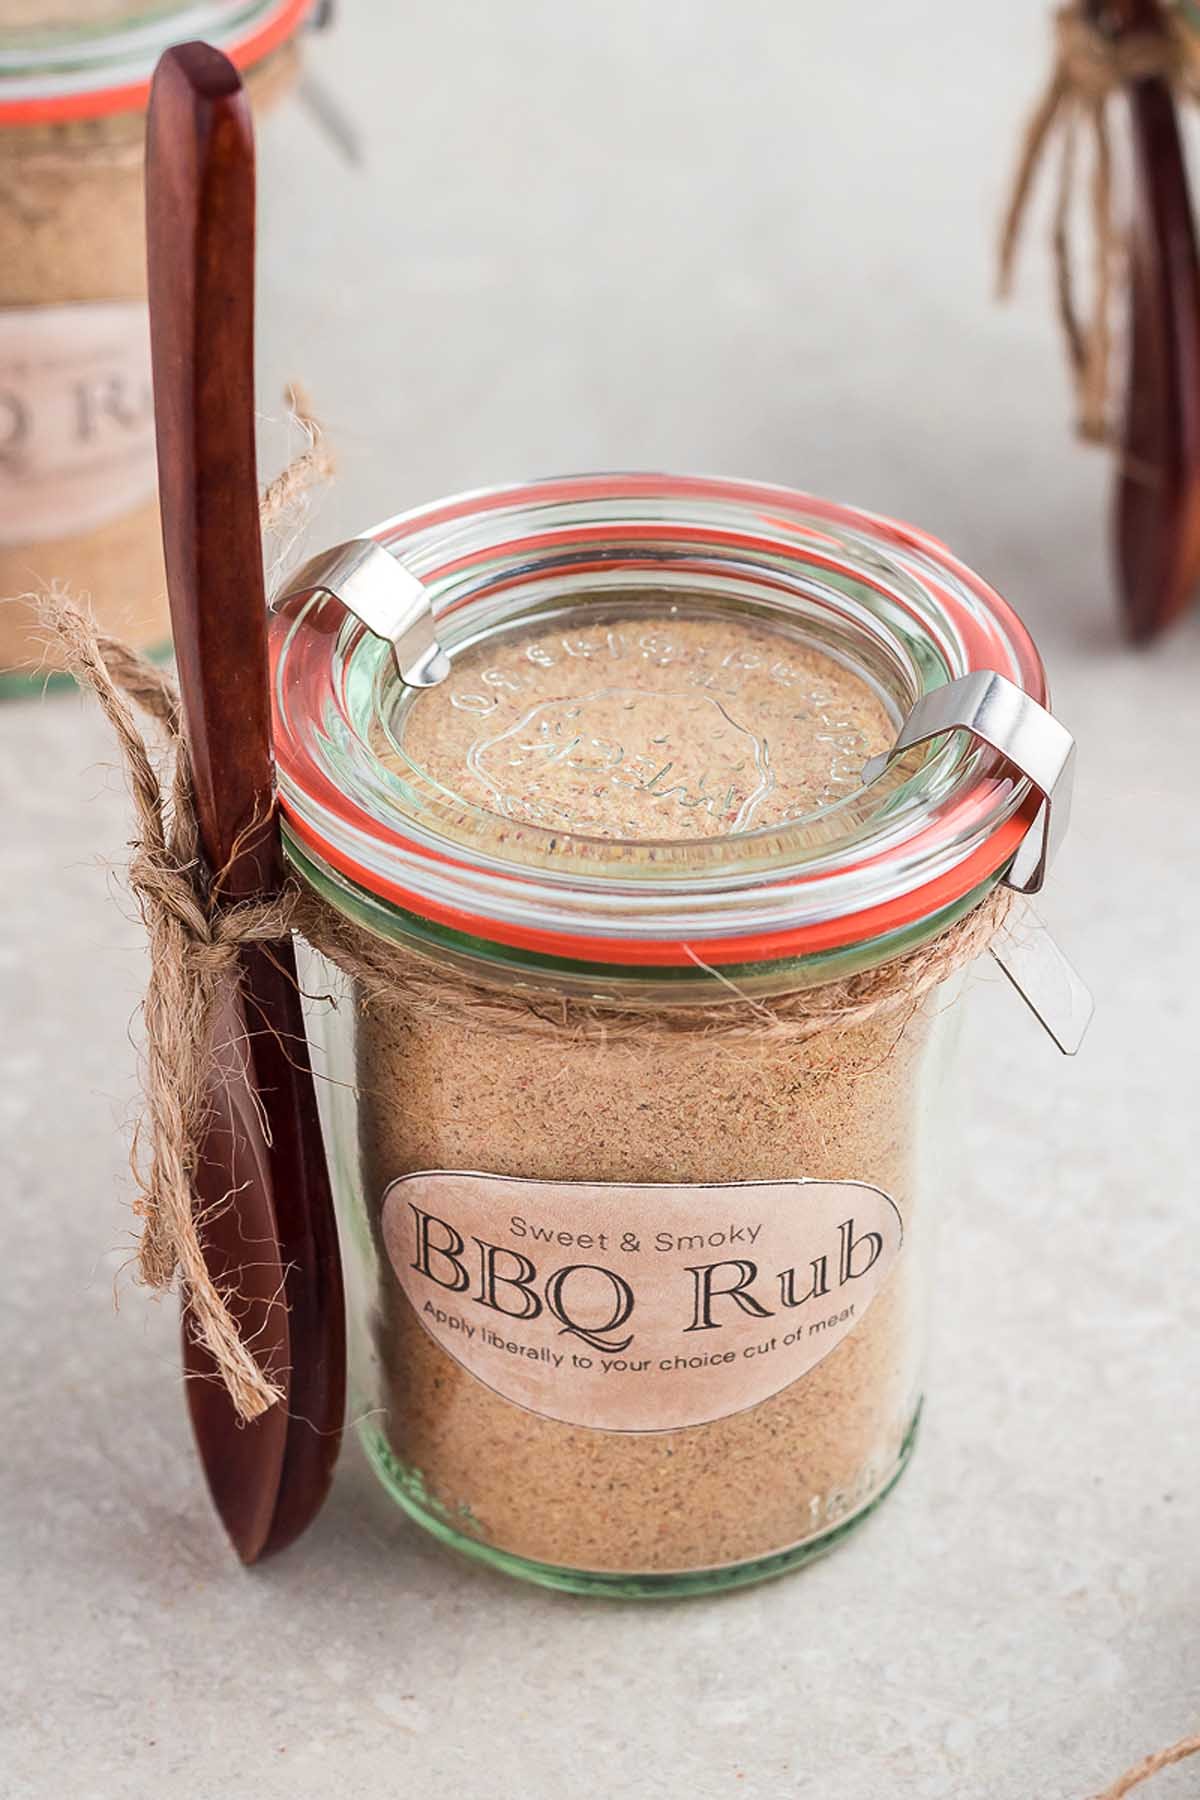 How to Store the DIY BBQ Rub Gift